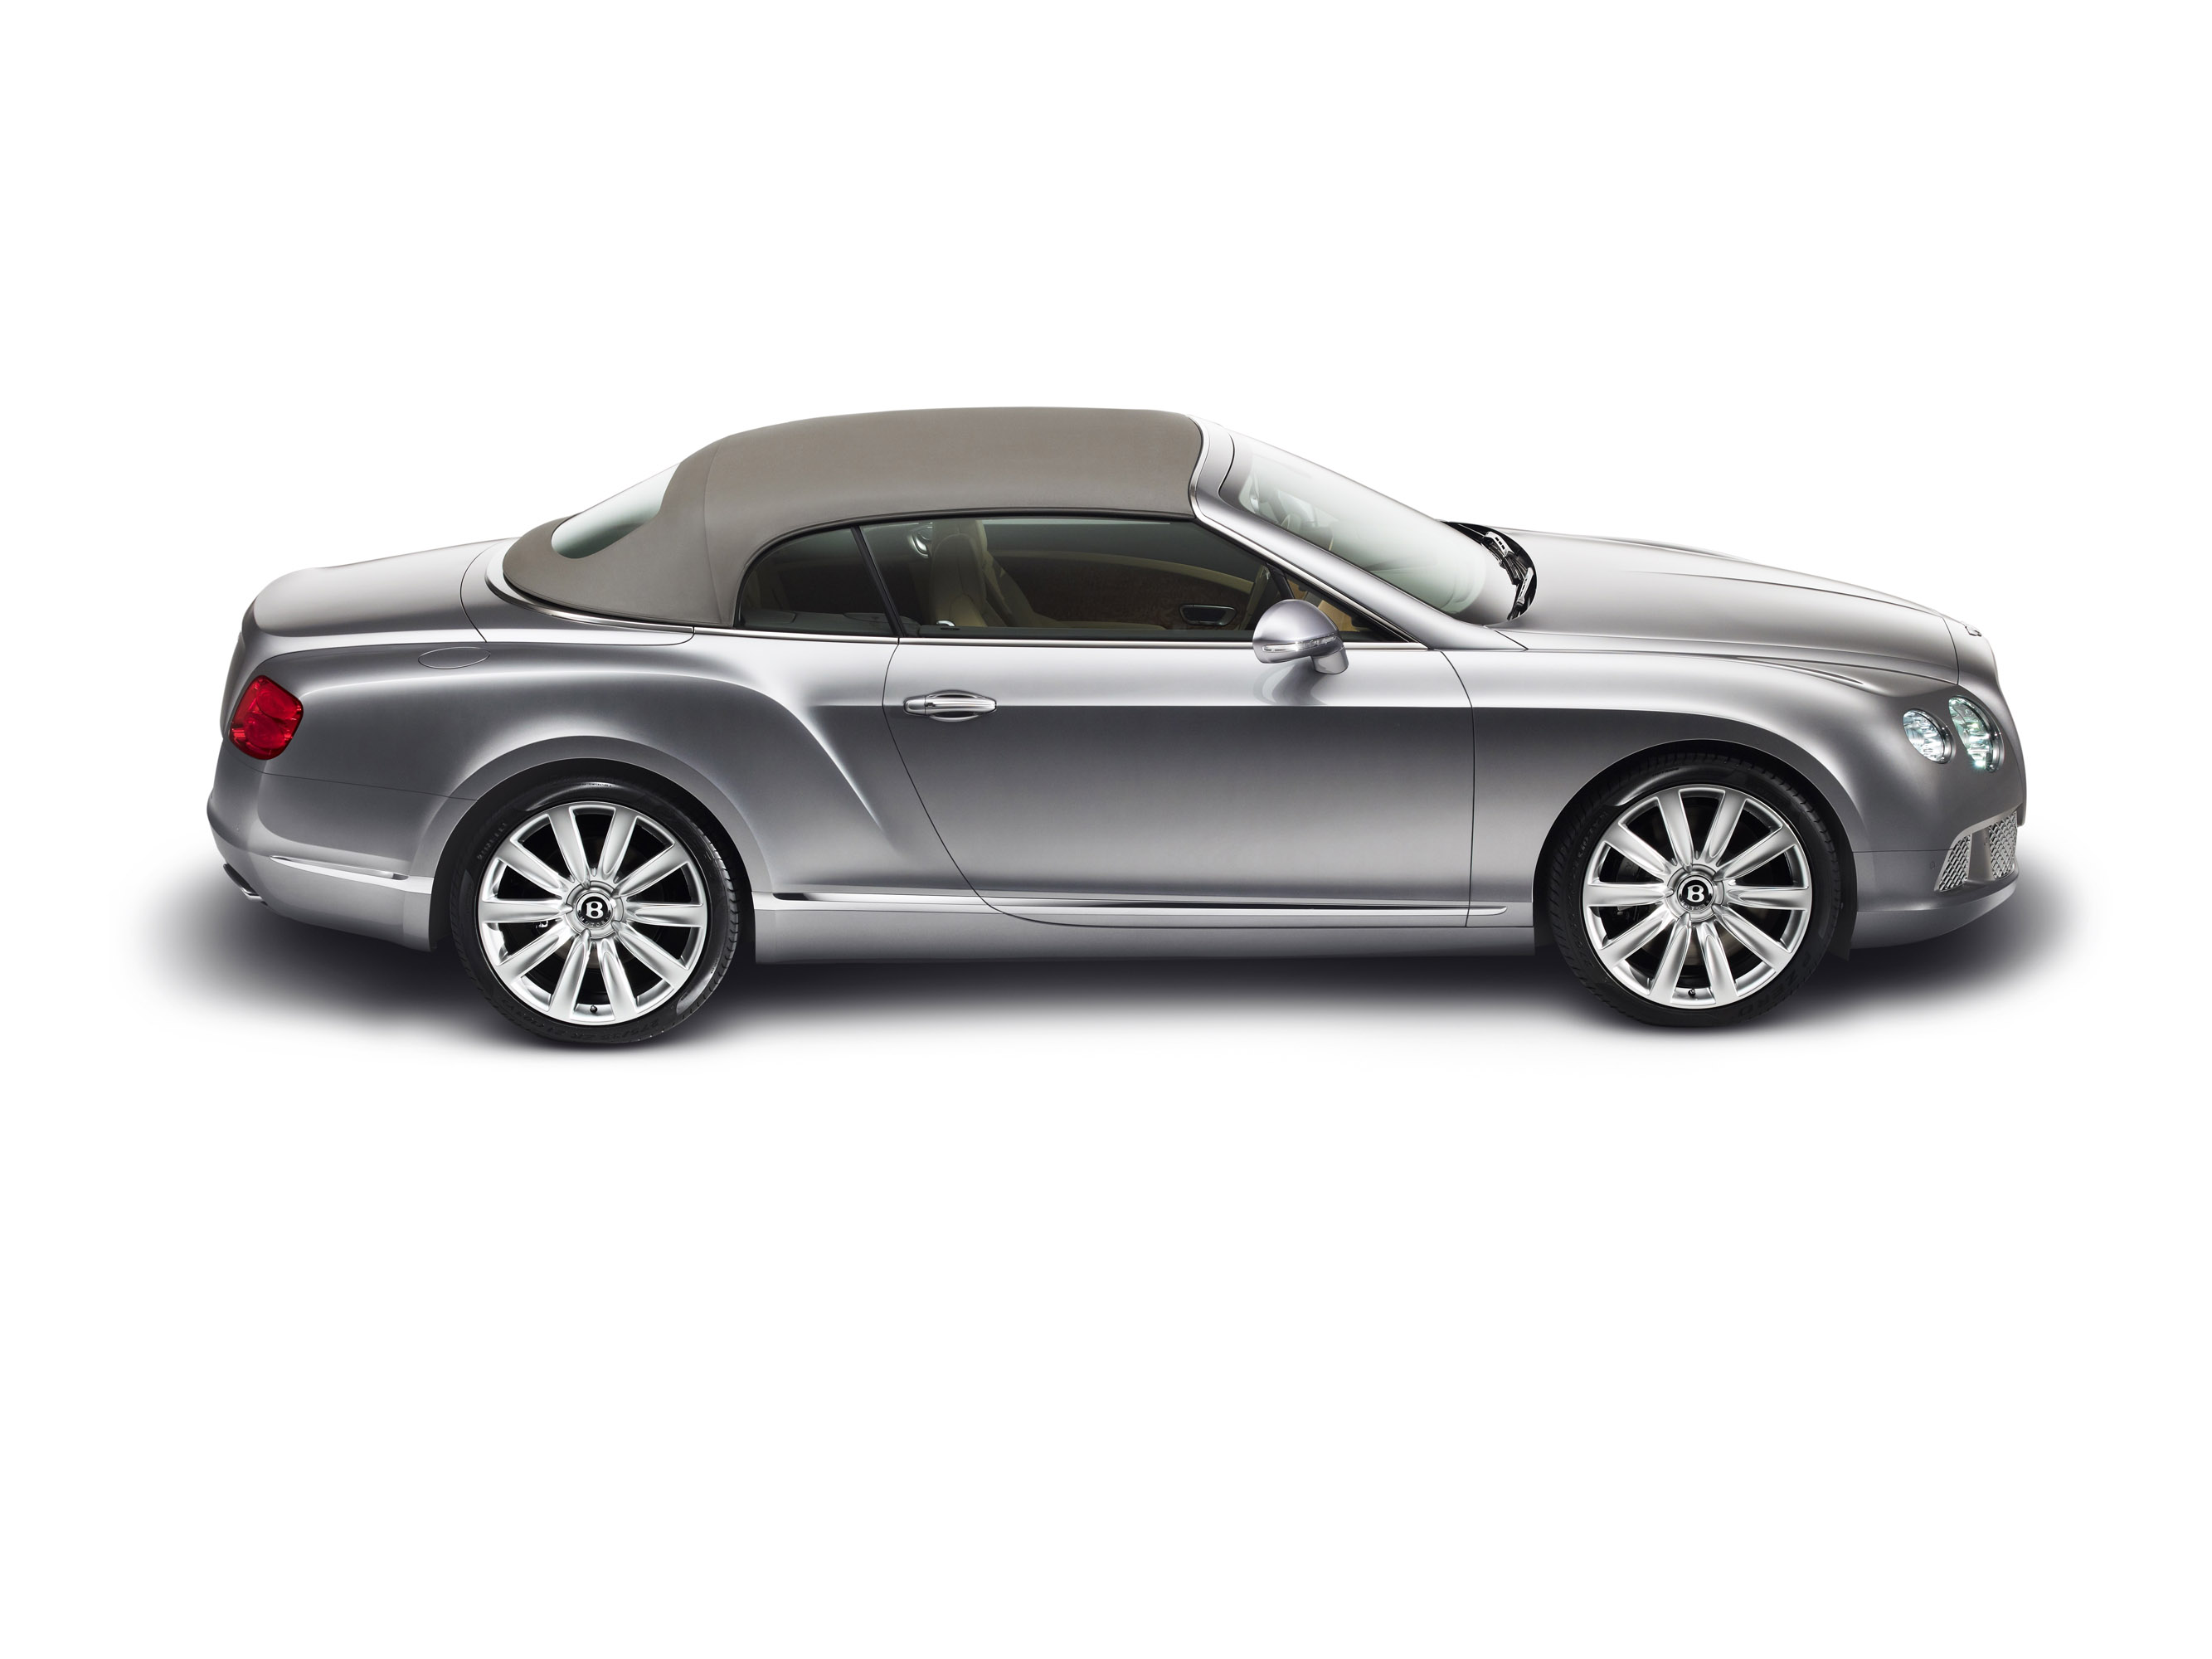 Bentley Continental GTC Convertible and Bentley Mulsanne at the Qatar 